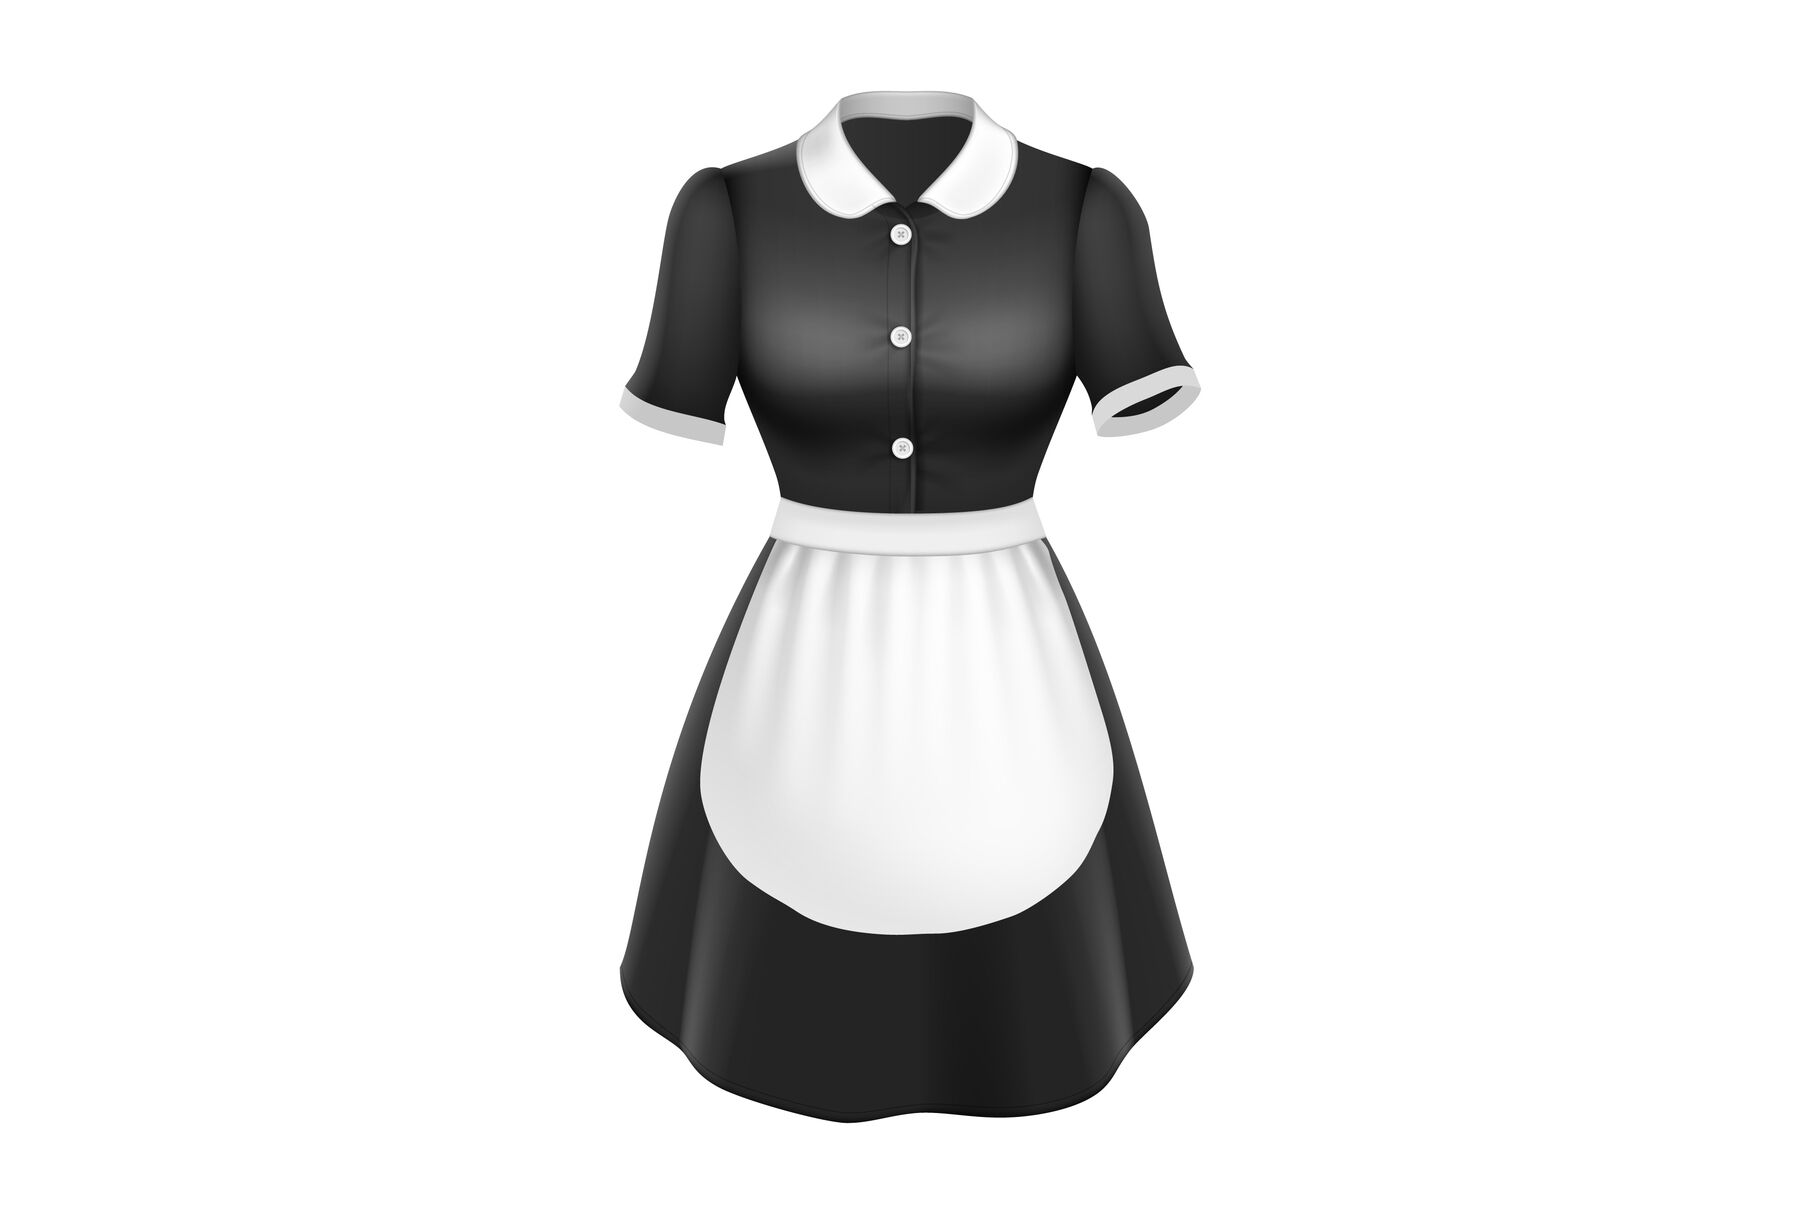 Maid Uniform With Apron Elegant Clothing Vector By Pikepicture ...